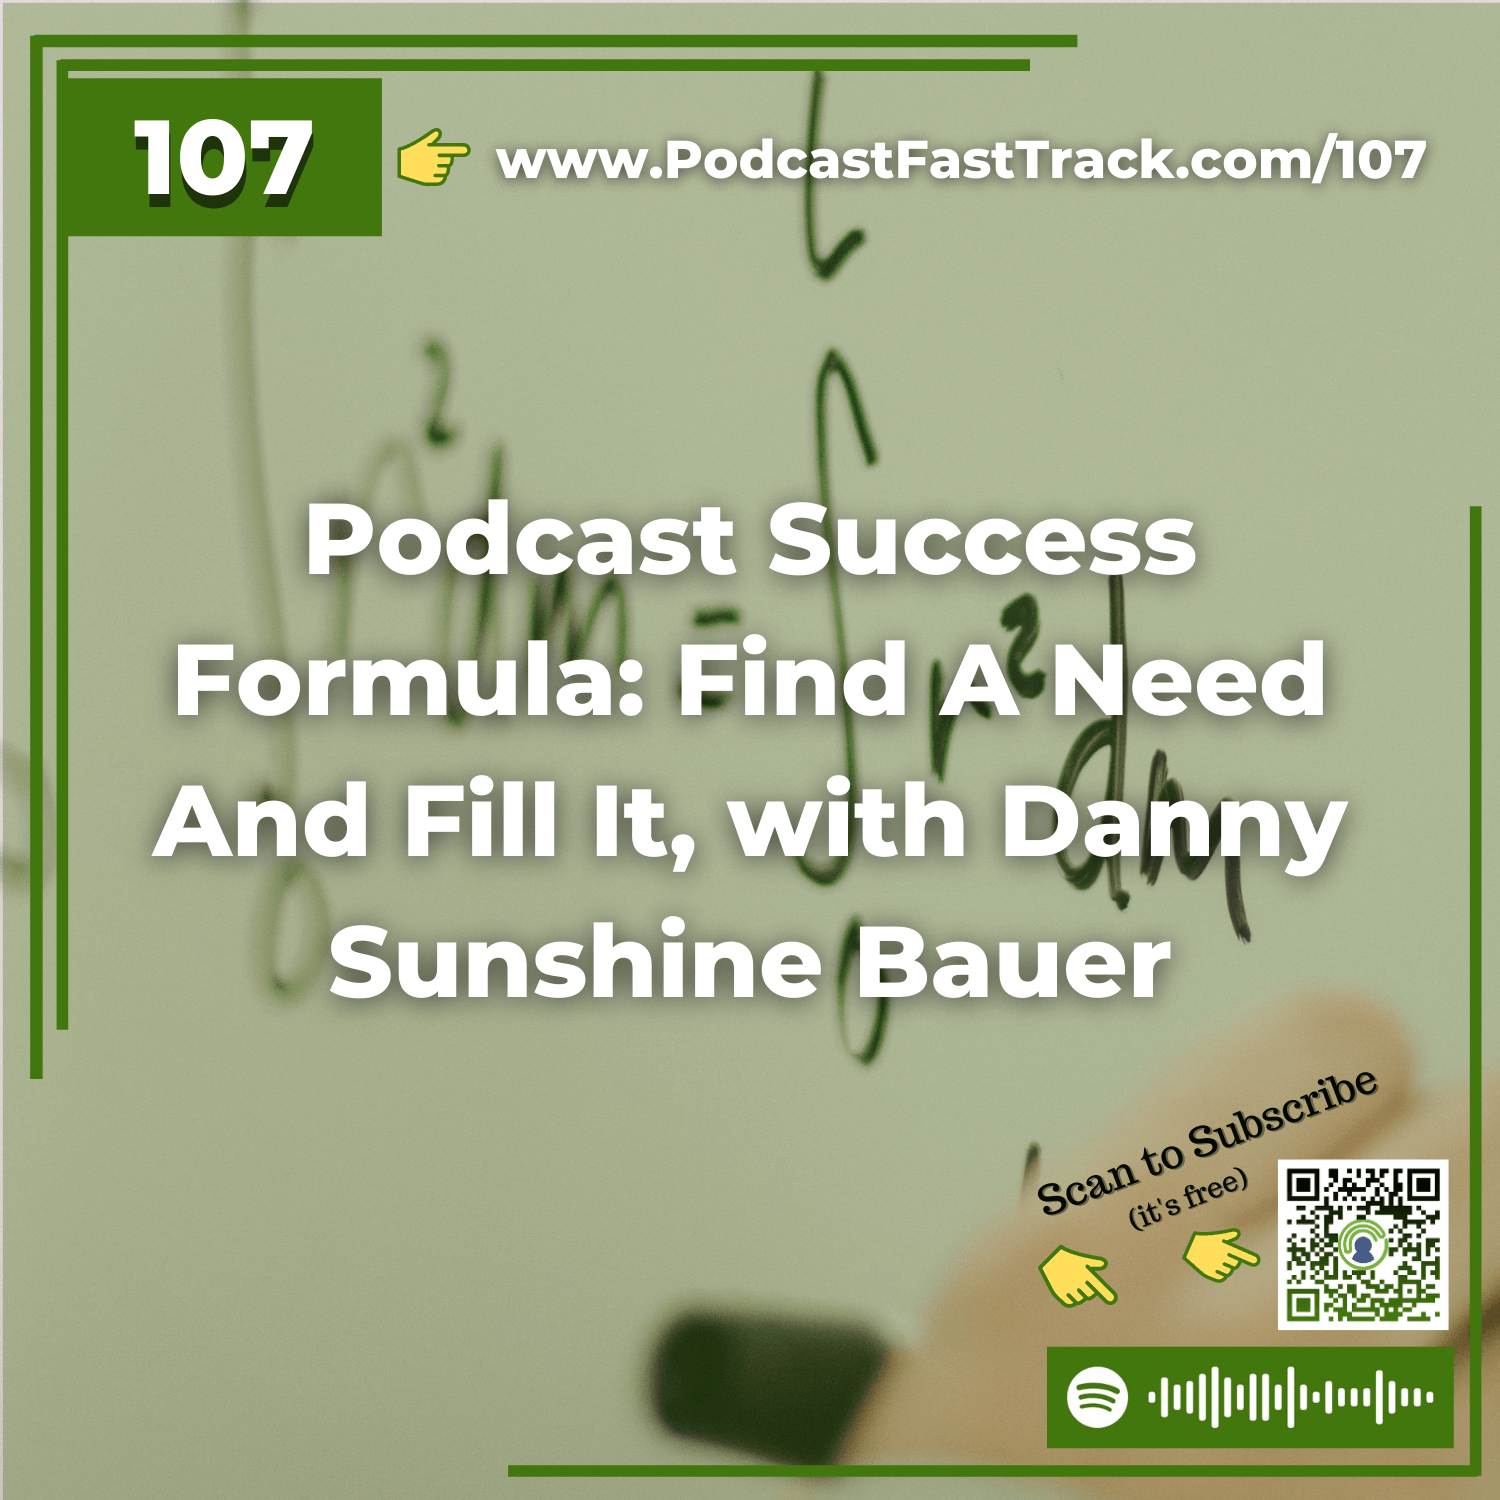 107: Podcast Success Formula: Find A Need And Fill It, with Danny Sunshine Bauer